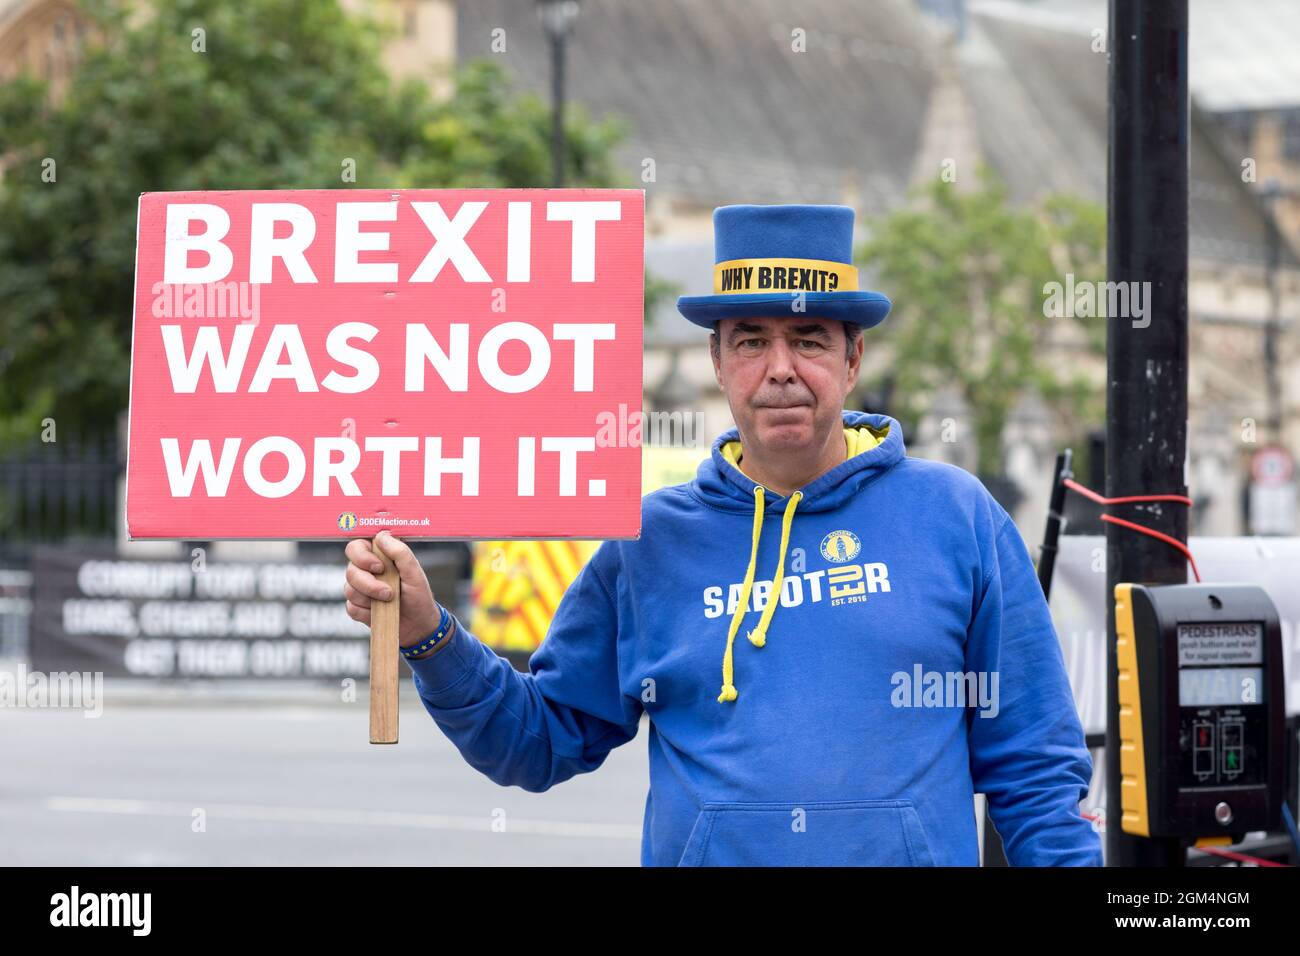 London, UK. 15th Sep, 2021. Steven Bray, founder of Stand of Defiance European Movement (SODEM), holding a placard that says 'Brexit was not worth it.' during the demonstration.Called by SODEM, Stand of Defiance European Movement, a group of anti-brexiters gathered at Westminster to protest the Boris Johnson government. They strive to deliver the message that Brexit was not the will of the people to the incumbent UK government. (Photo by Belinda Jiao/SOPA Images/Sipa USA) Credit: Sipa USA/Alamy Live News Stock Photo